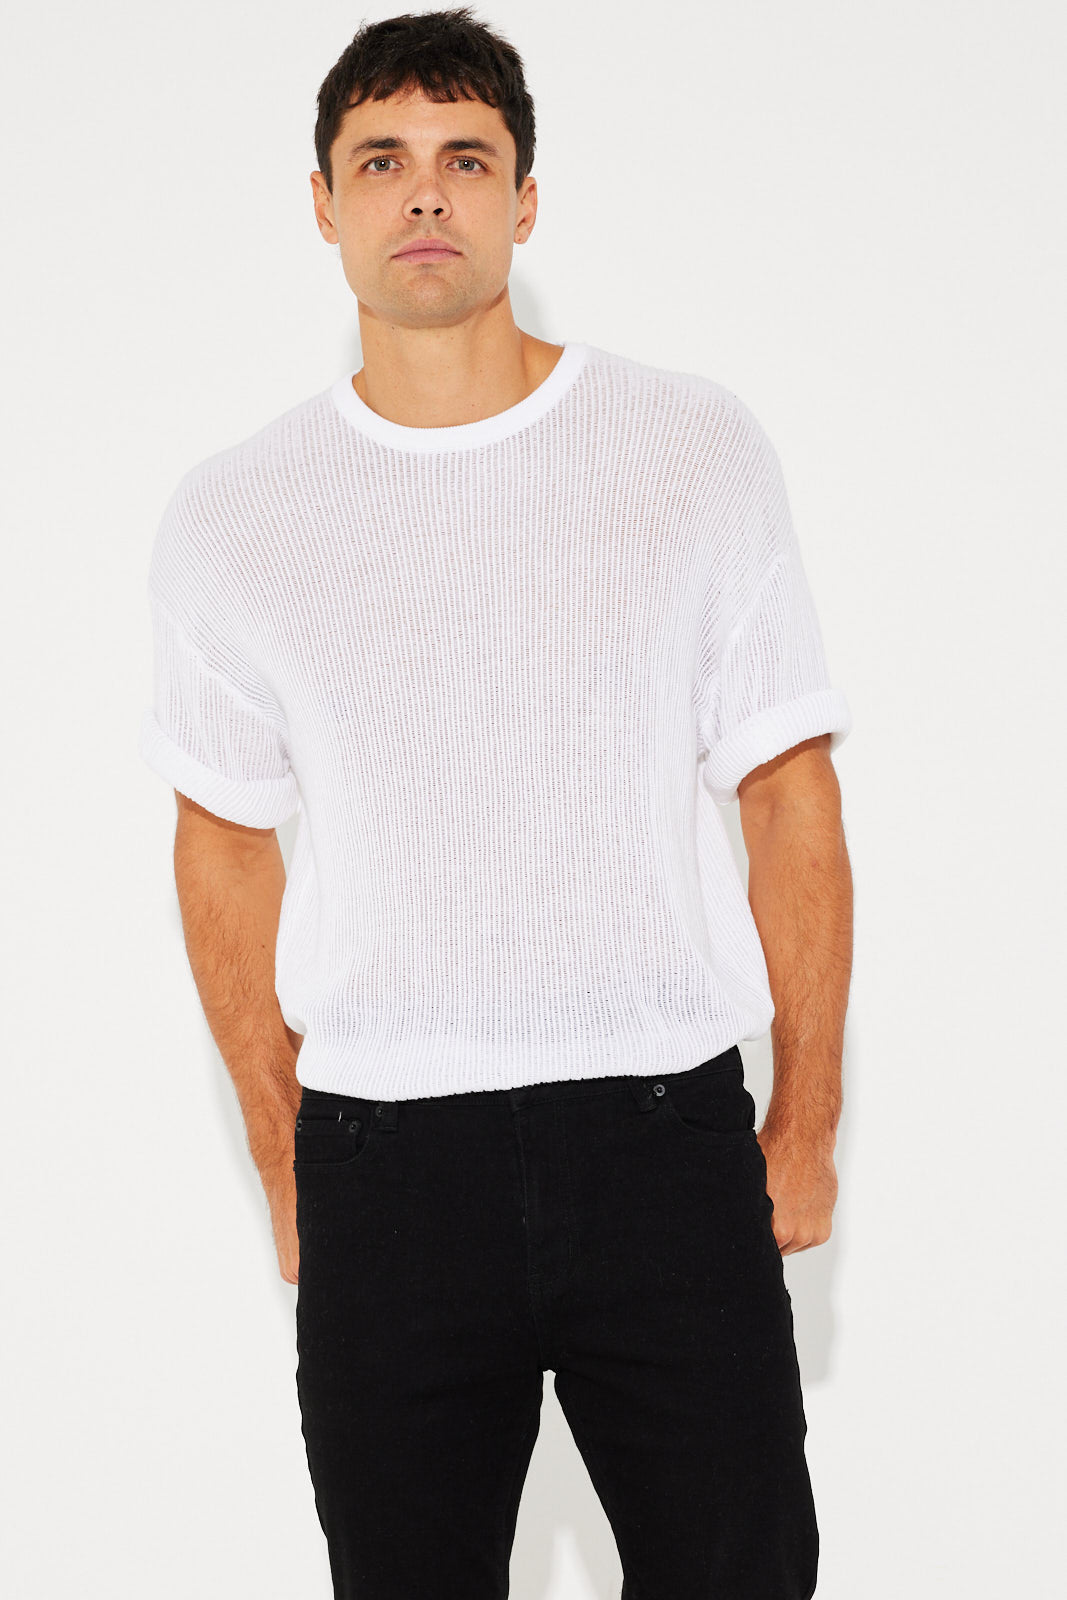 ASOS Is Selling a Crop Top for Men